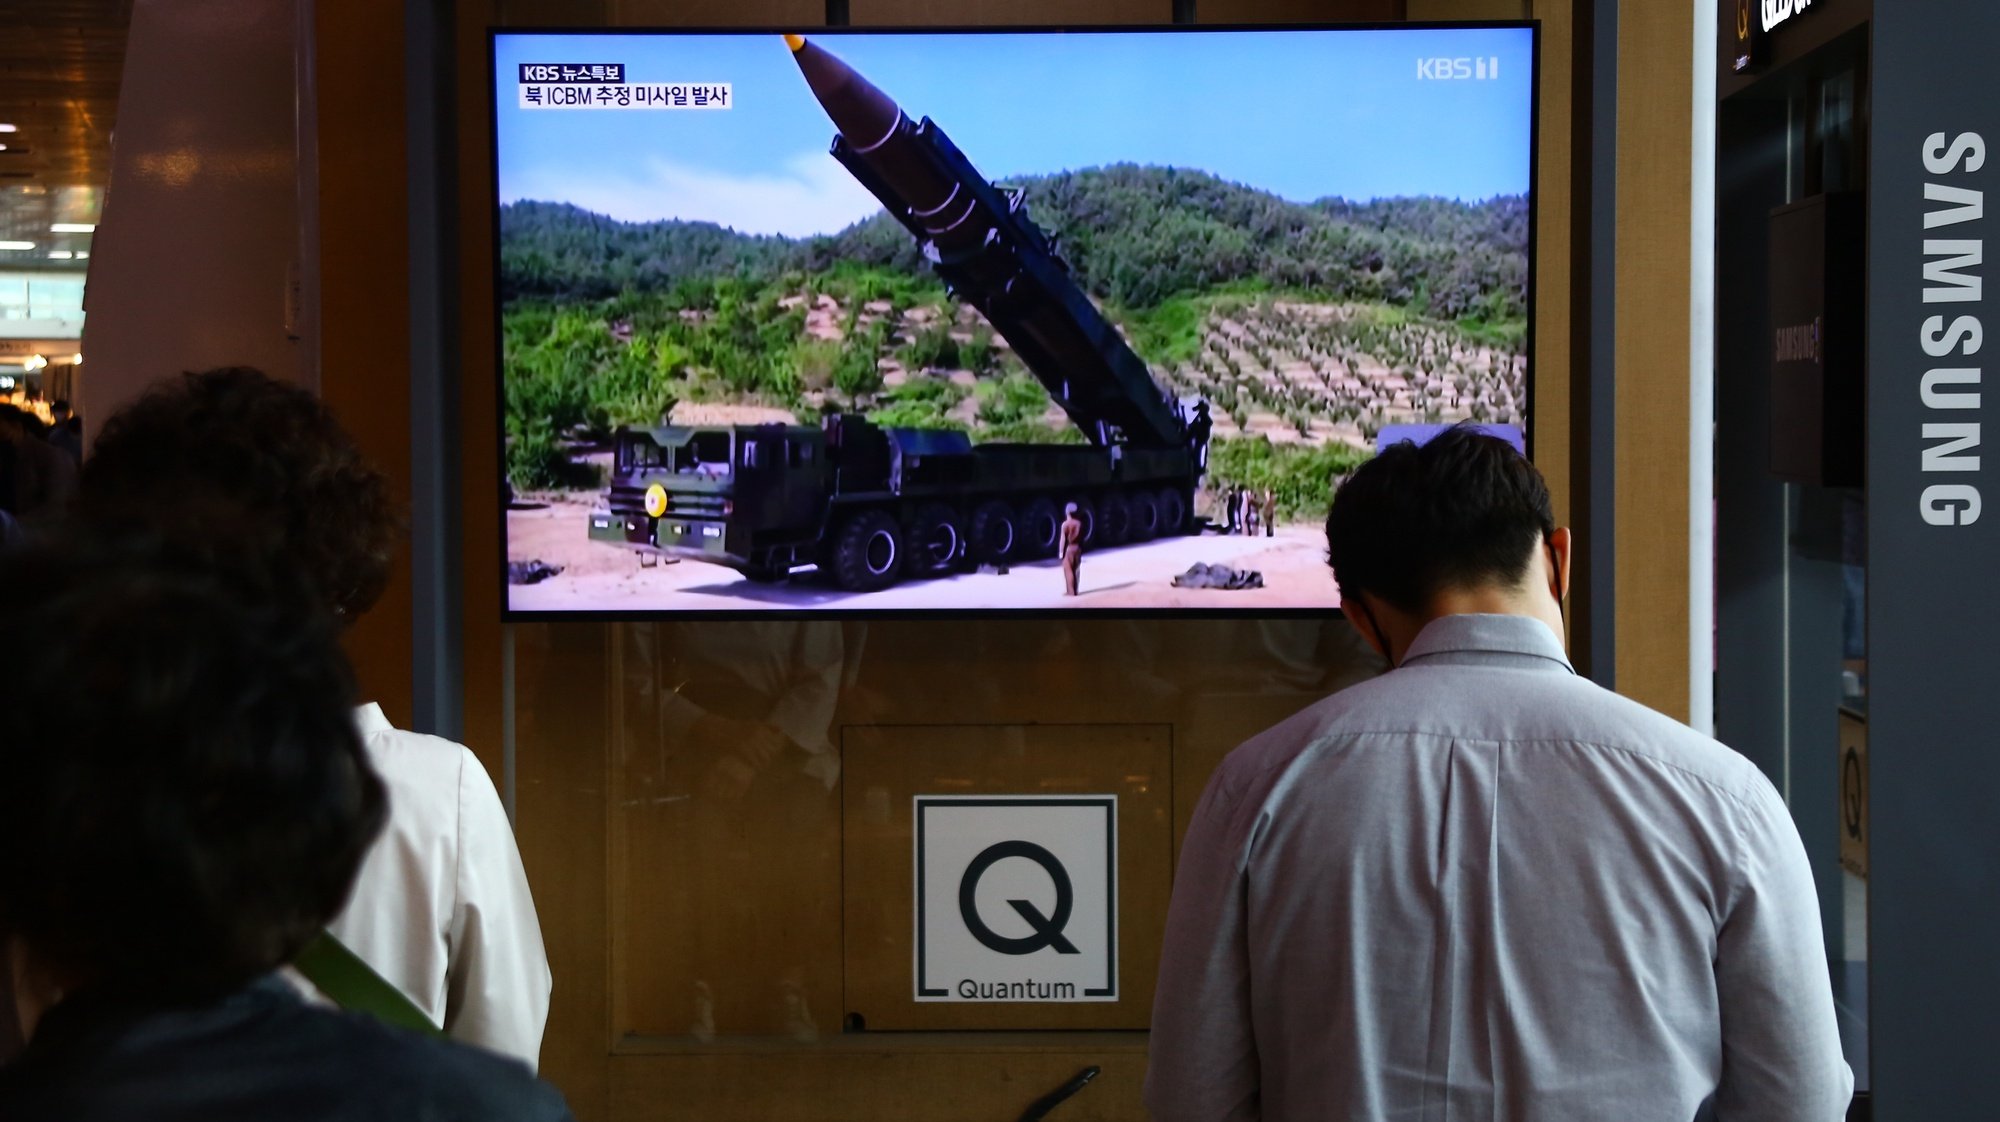 epa09973616 People watch the news at a station in Seoul, South Korea, 25 May 2022. According to South Korea&#039;s Joint Chiefs of Staff (JCS), North Korea fired three ballistic missile toward the East Sea on 25 May.  EPA/JEON HEON-KYUN